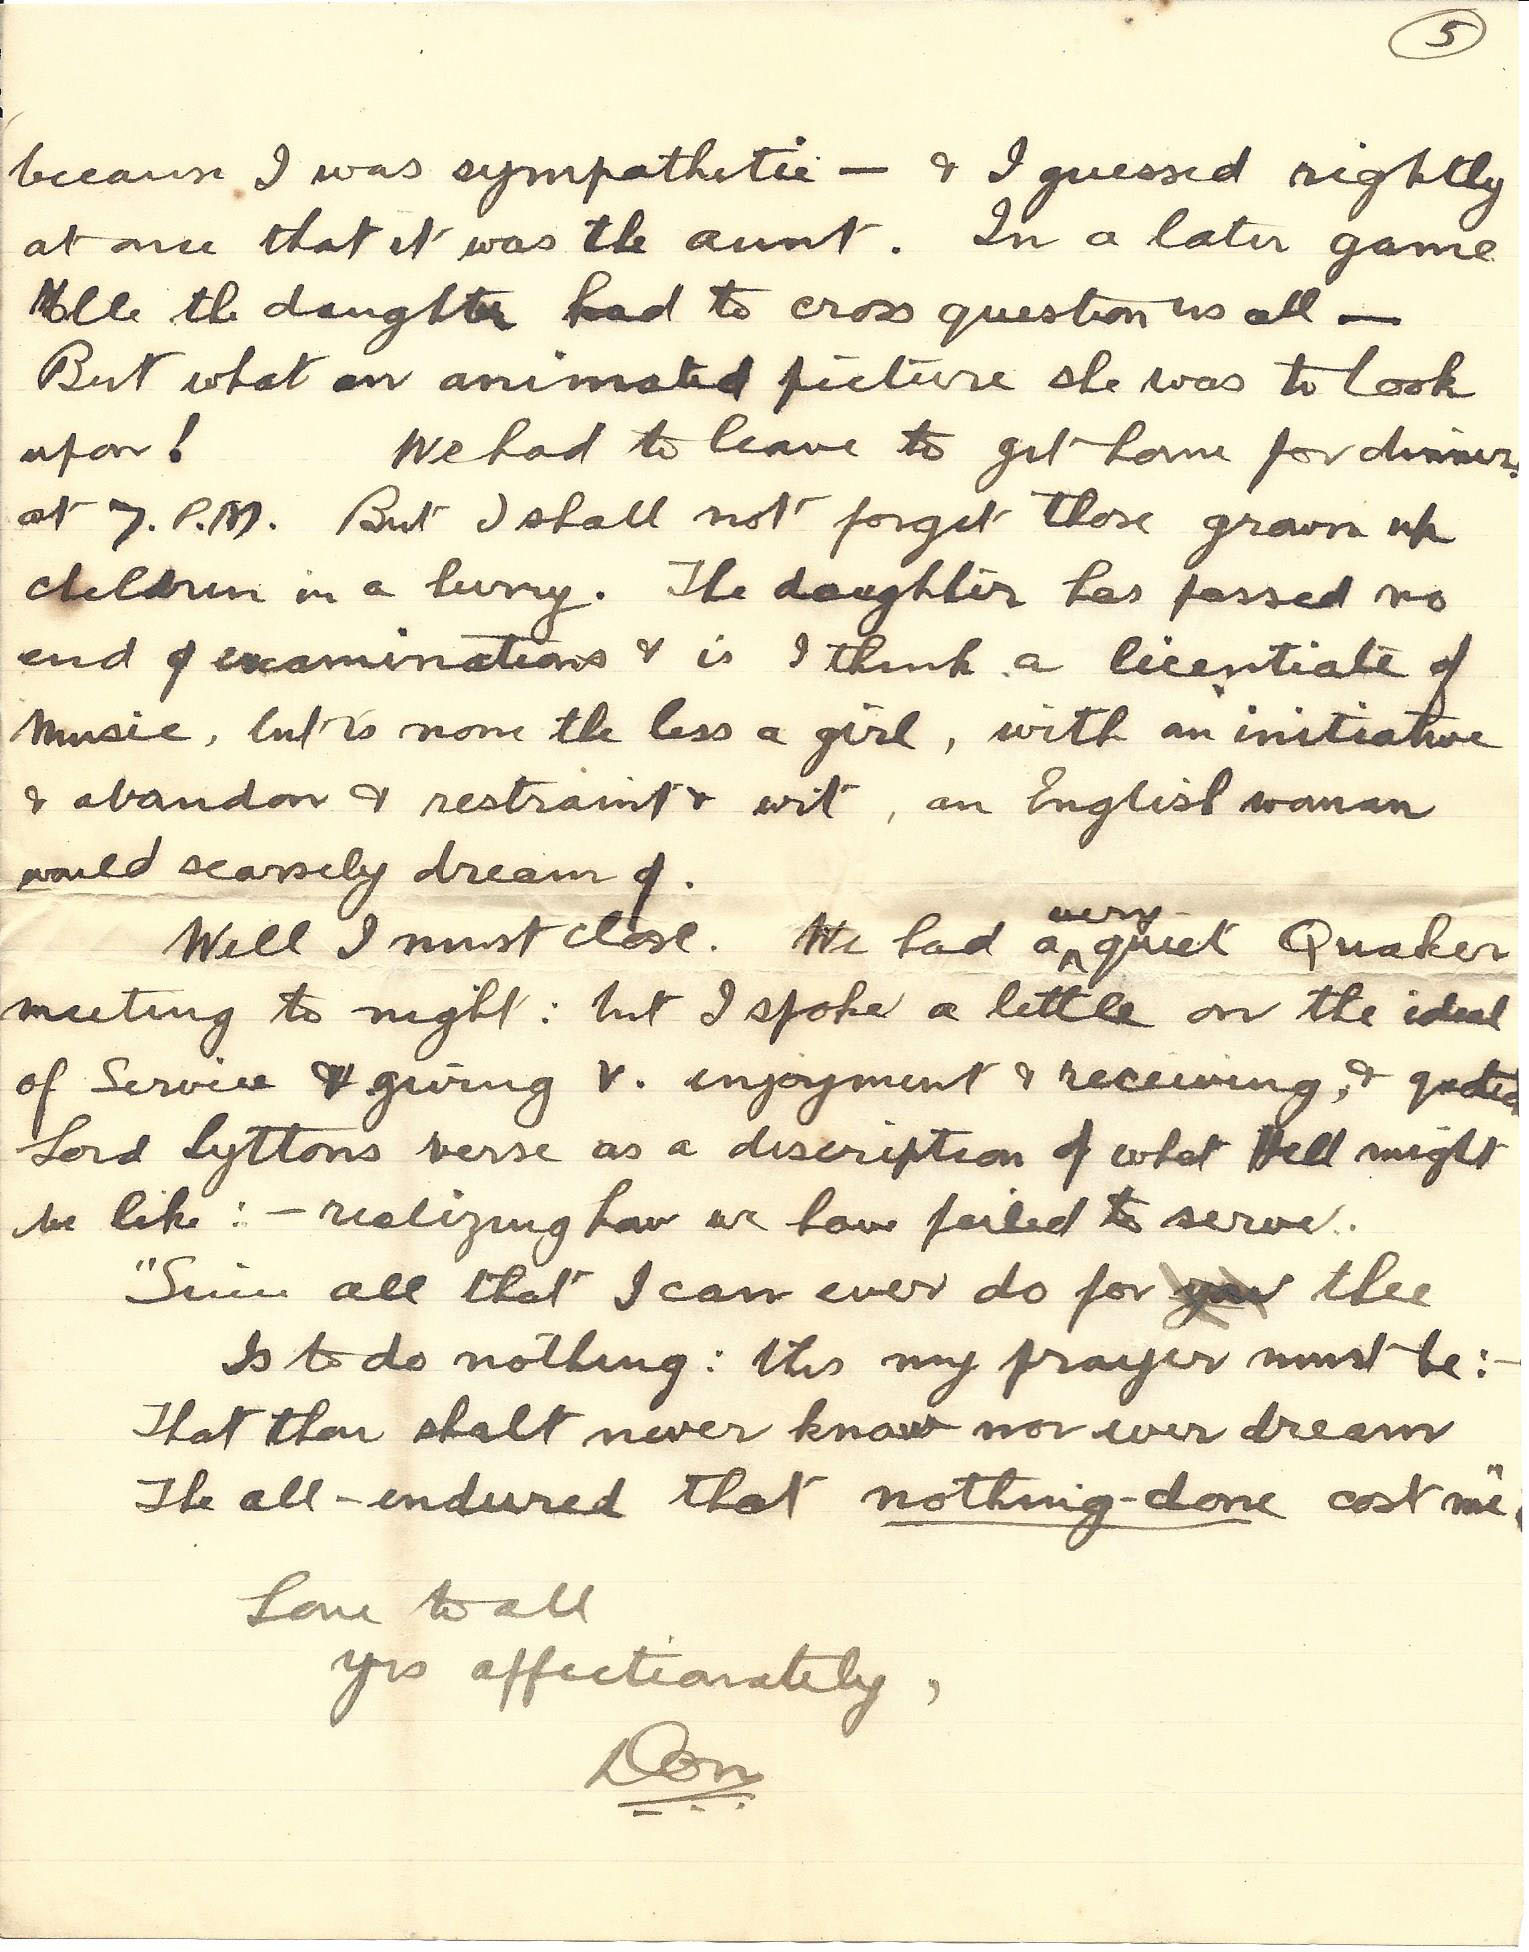 1919-07-20 p5 Donald Bearman letter to his father